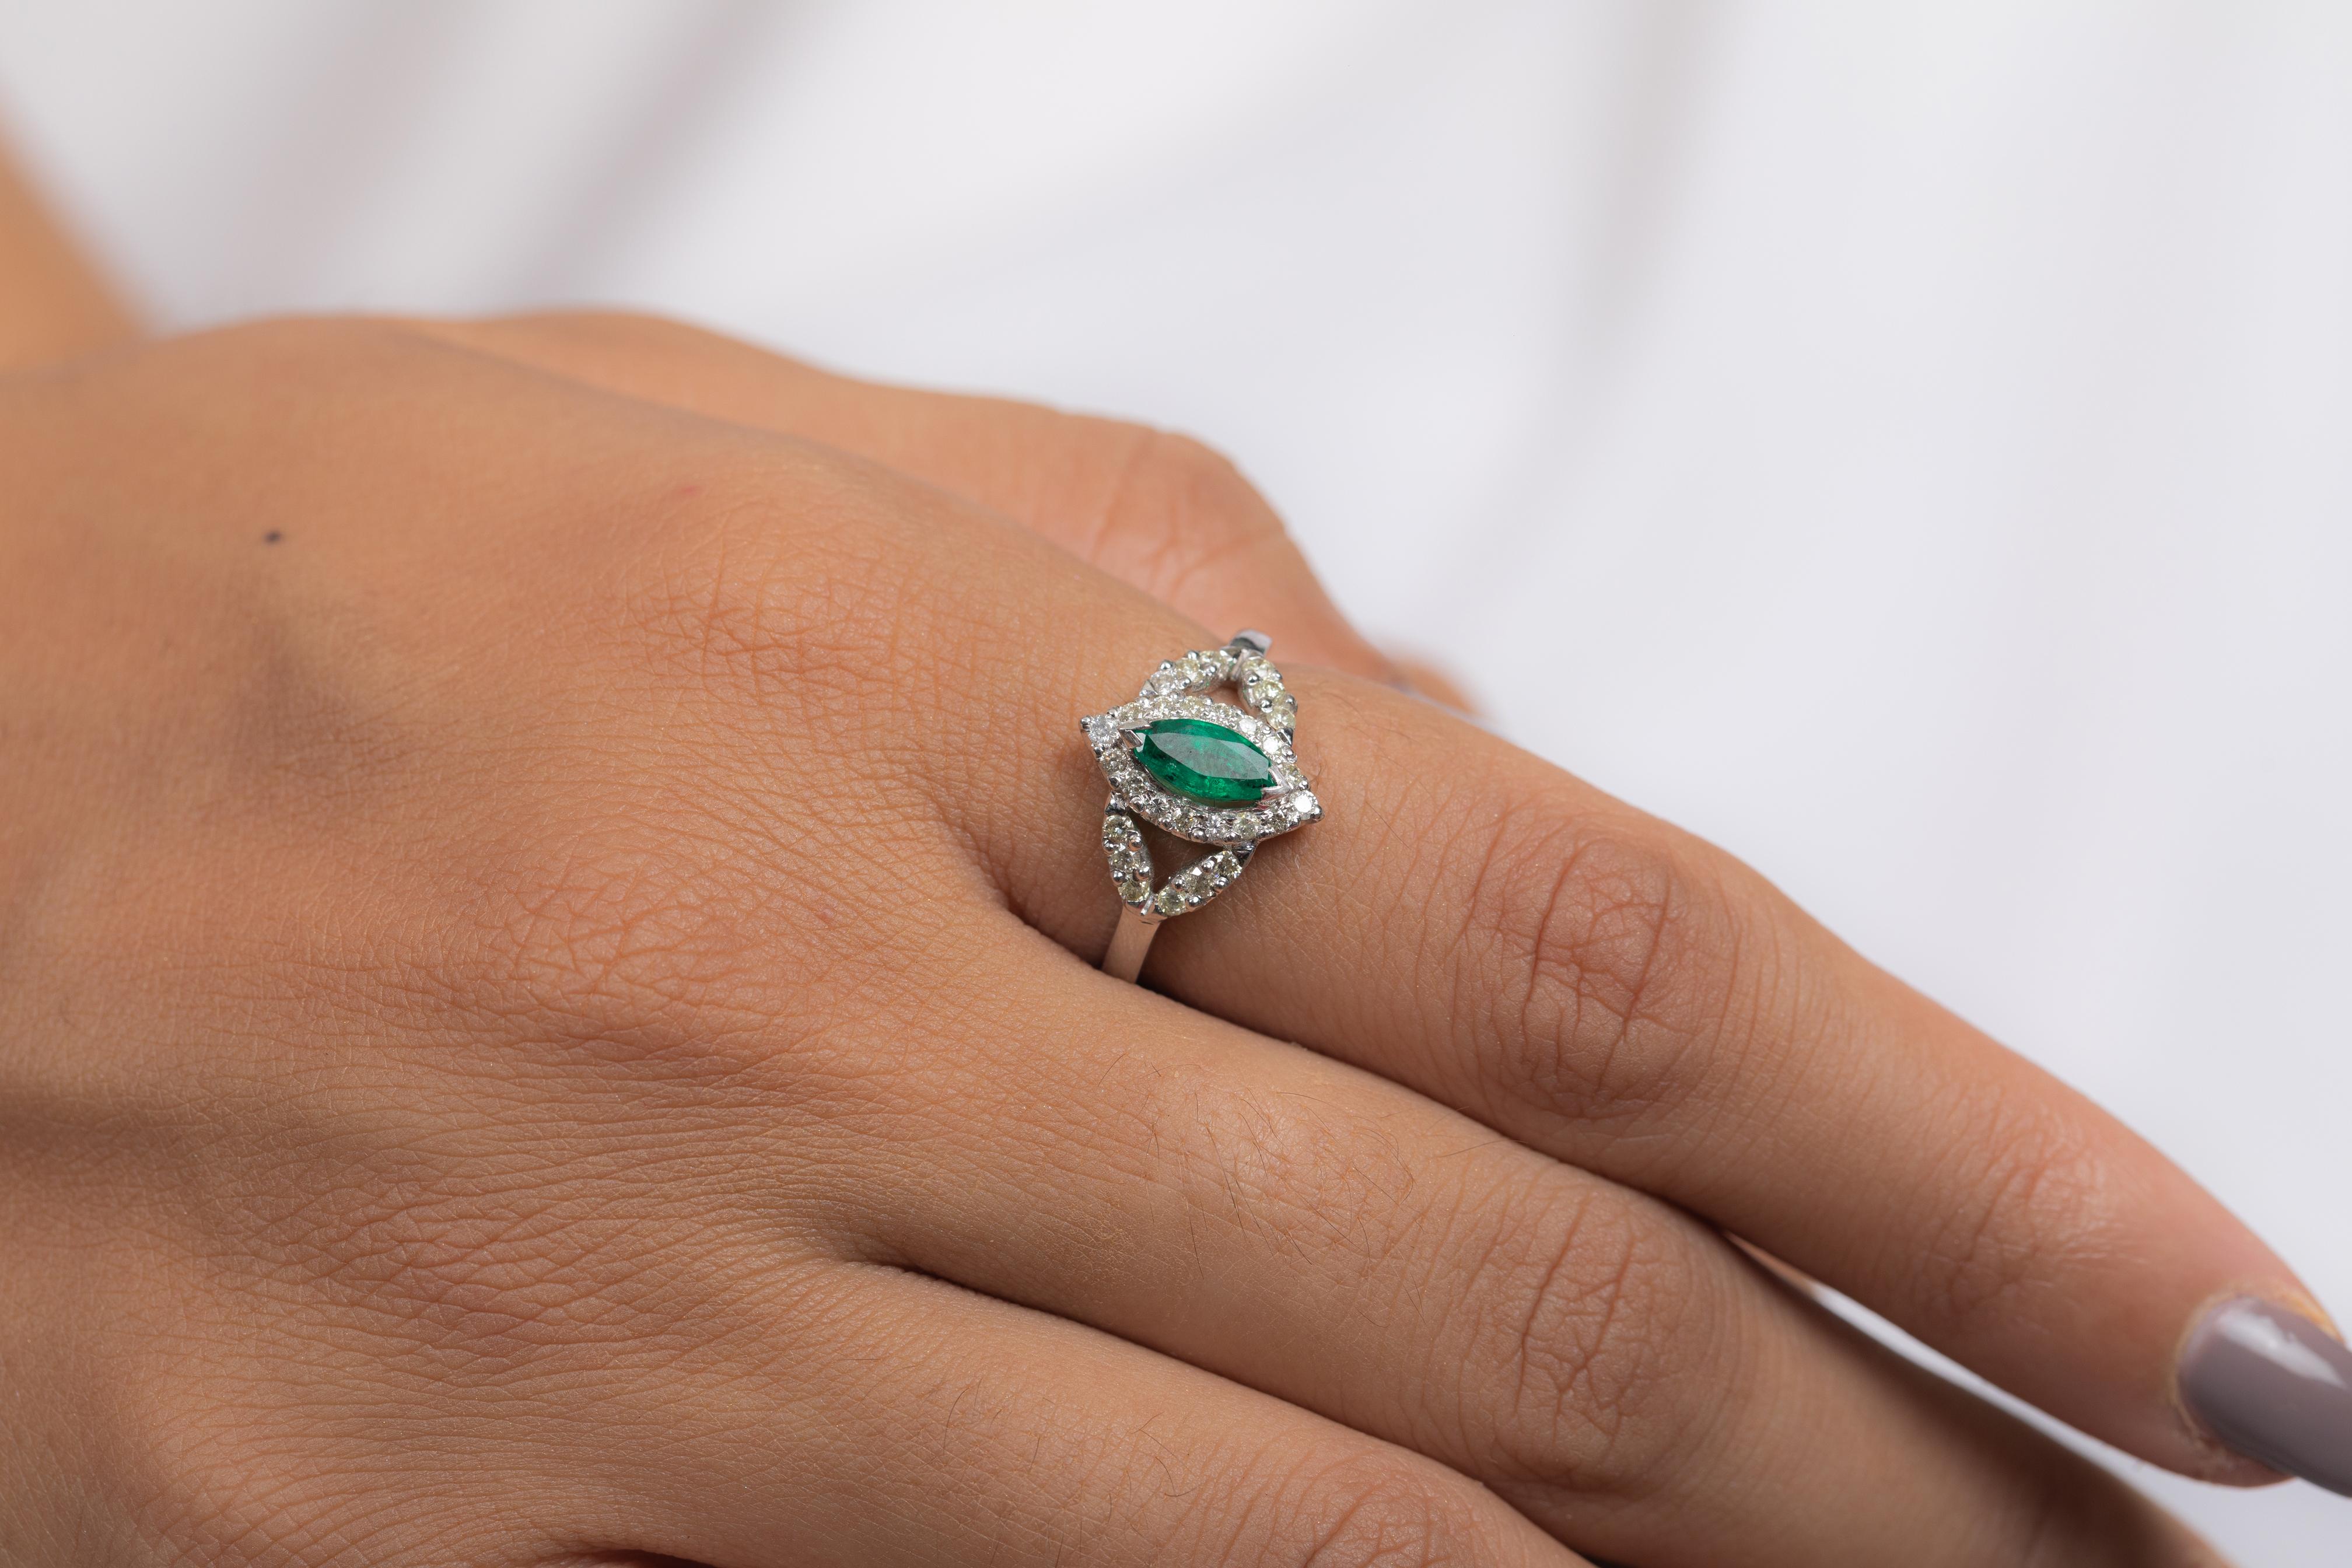 For Sale:  Natural Emerald Gemstone Wedding Ring with Diamonds in 18 Karat Solid White Gold 5